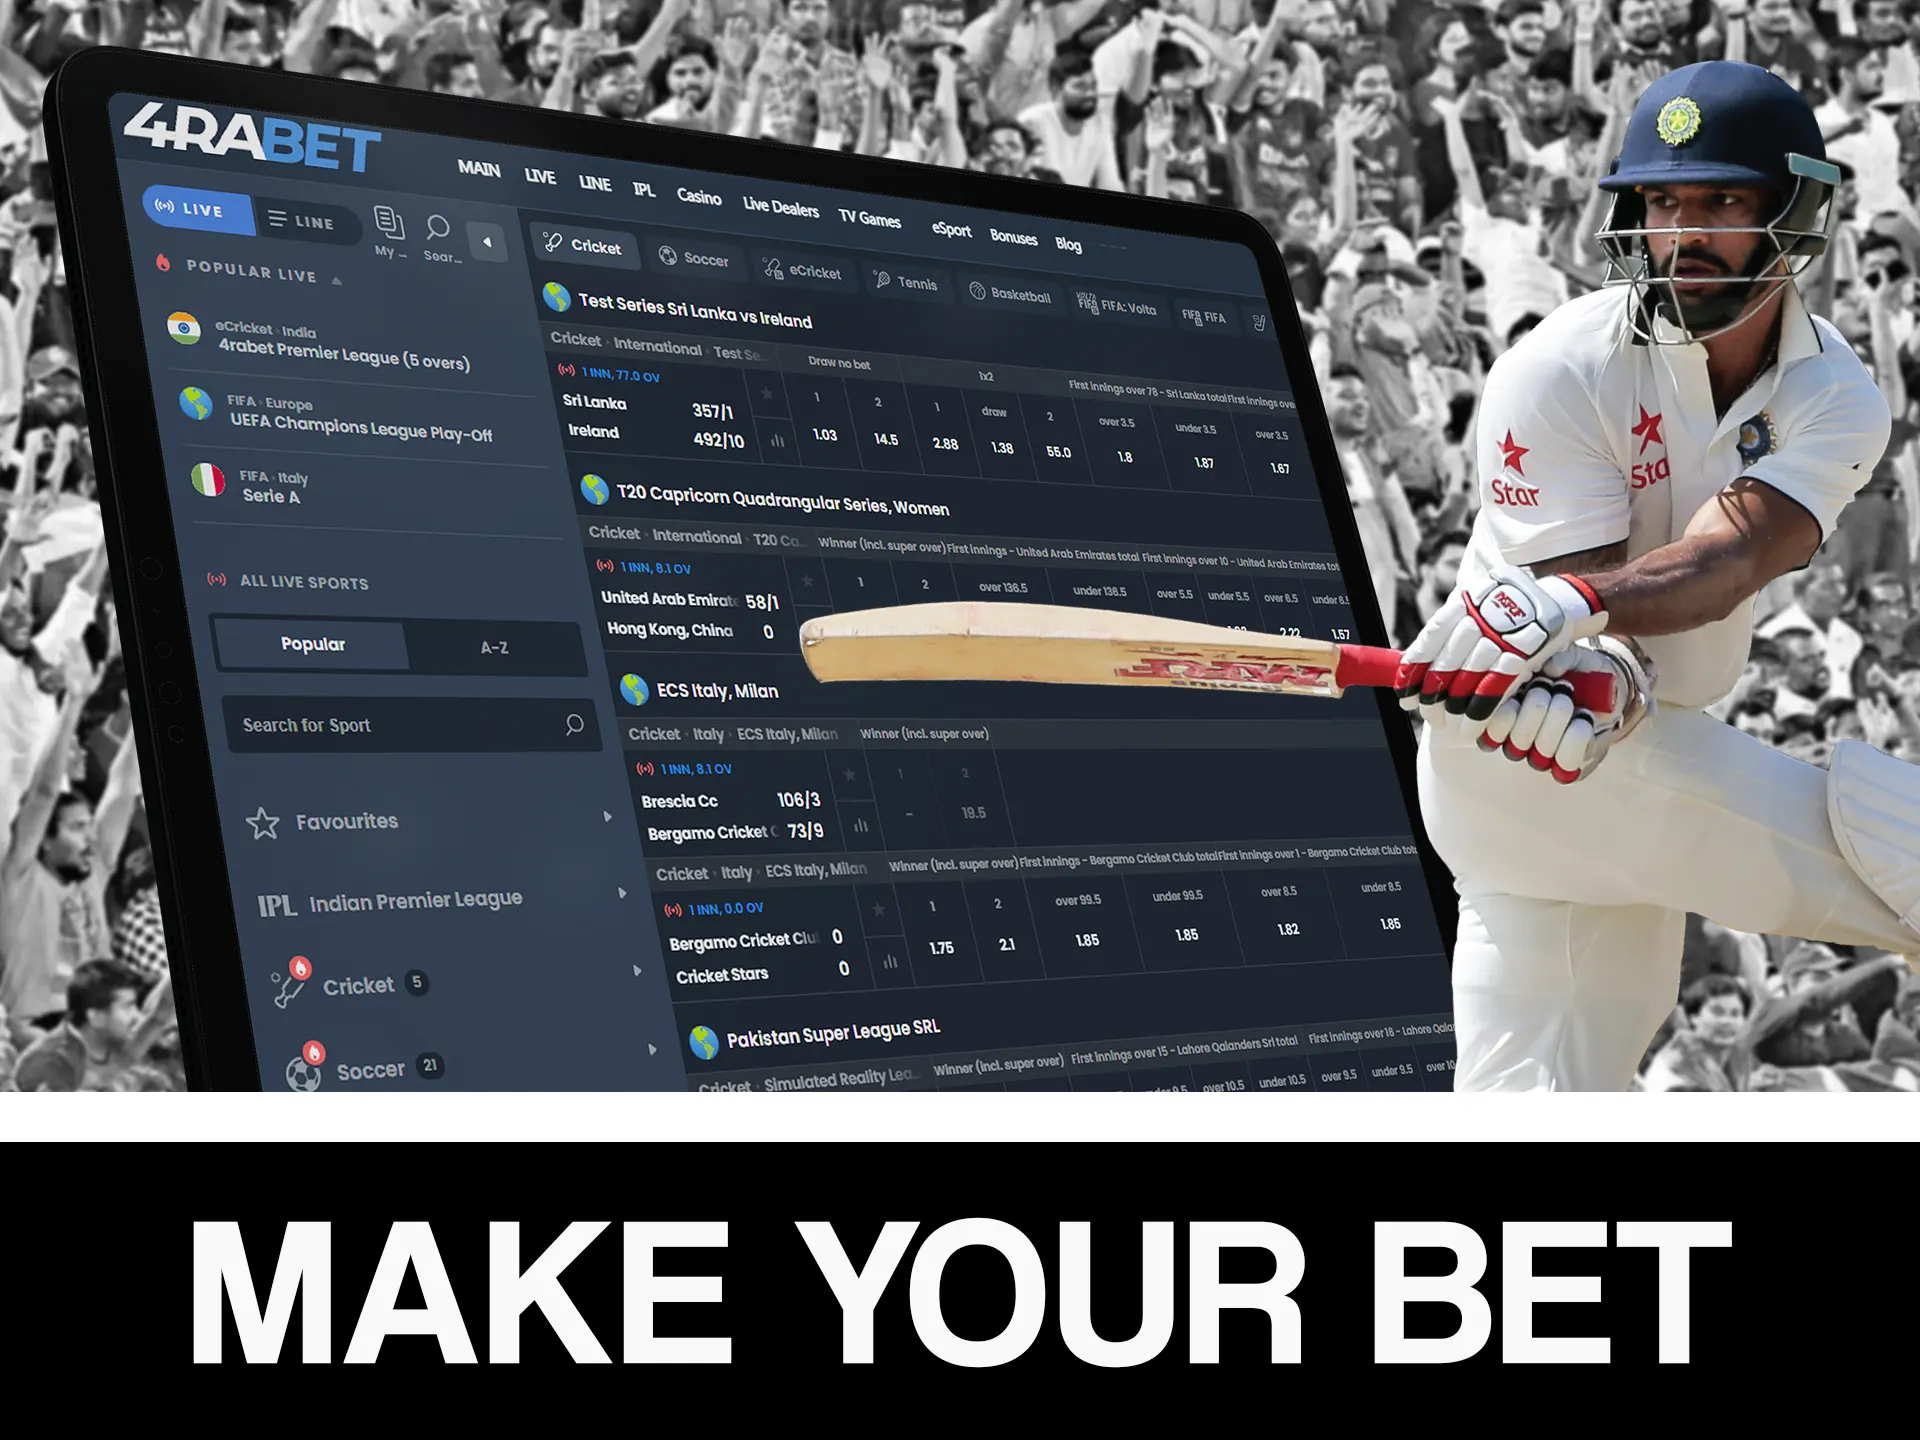 Start making bets on different IPL matches.